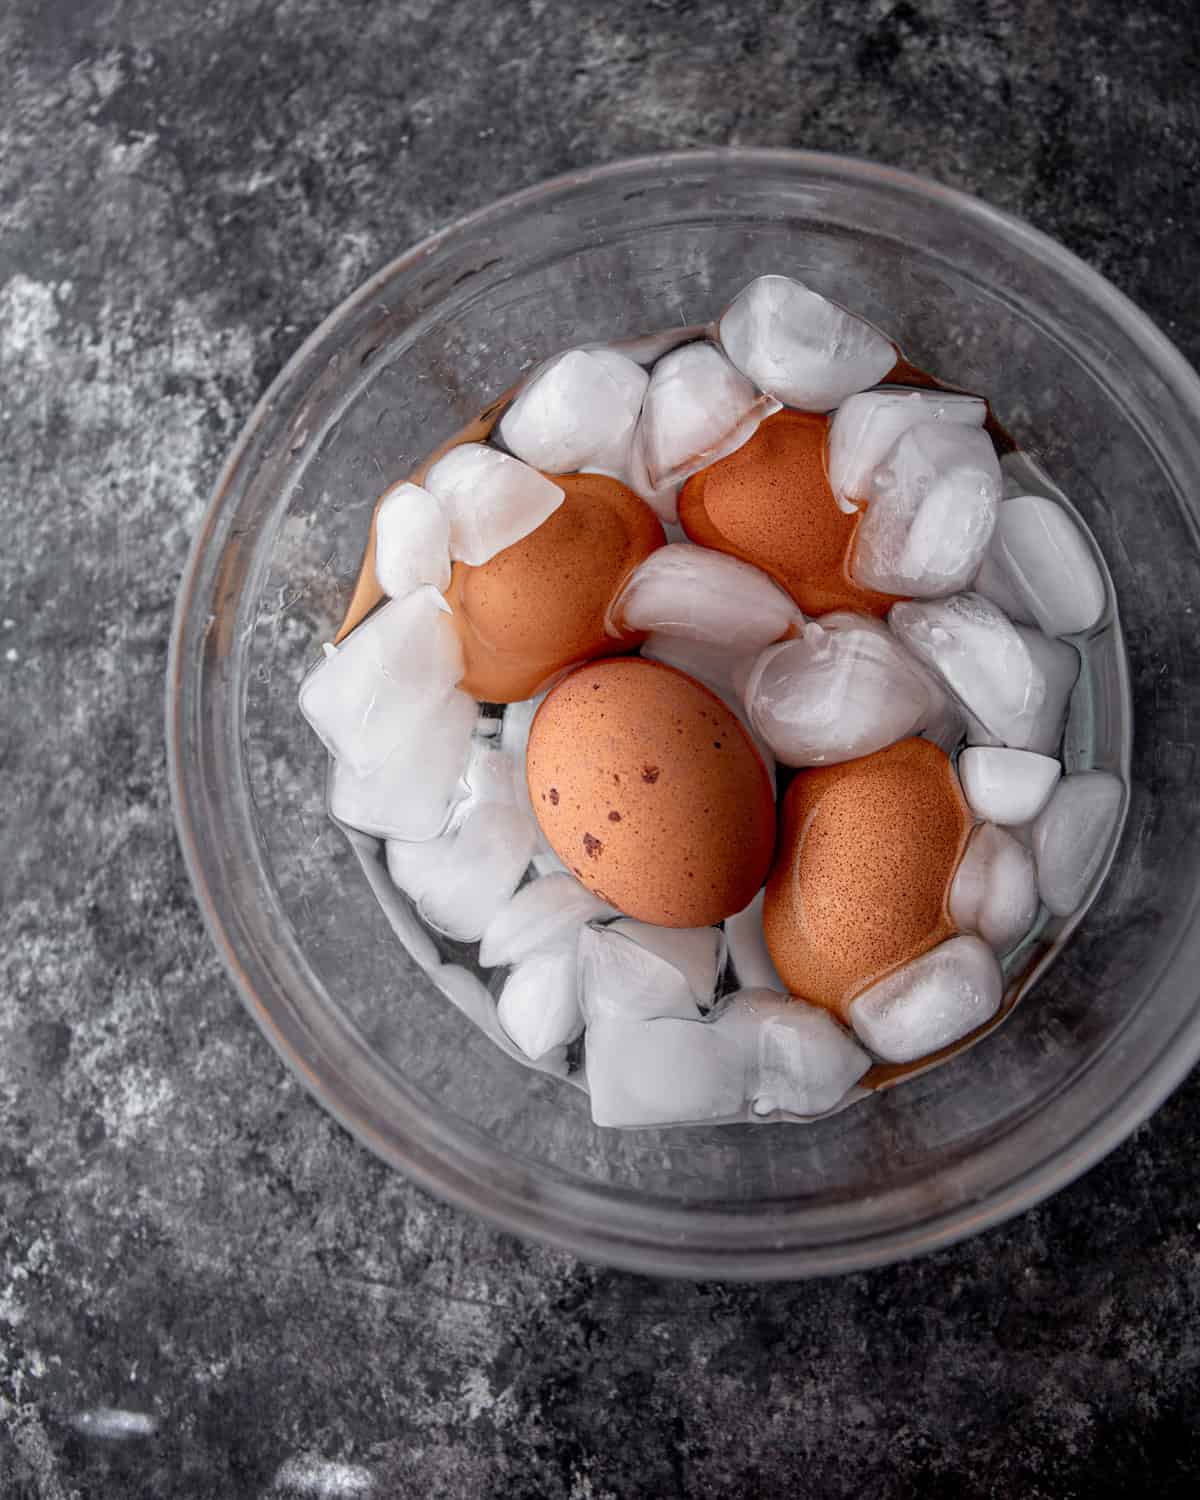 soft boiled eggs in a clear glass bowl with ice